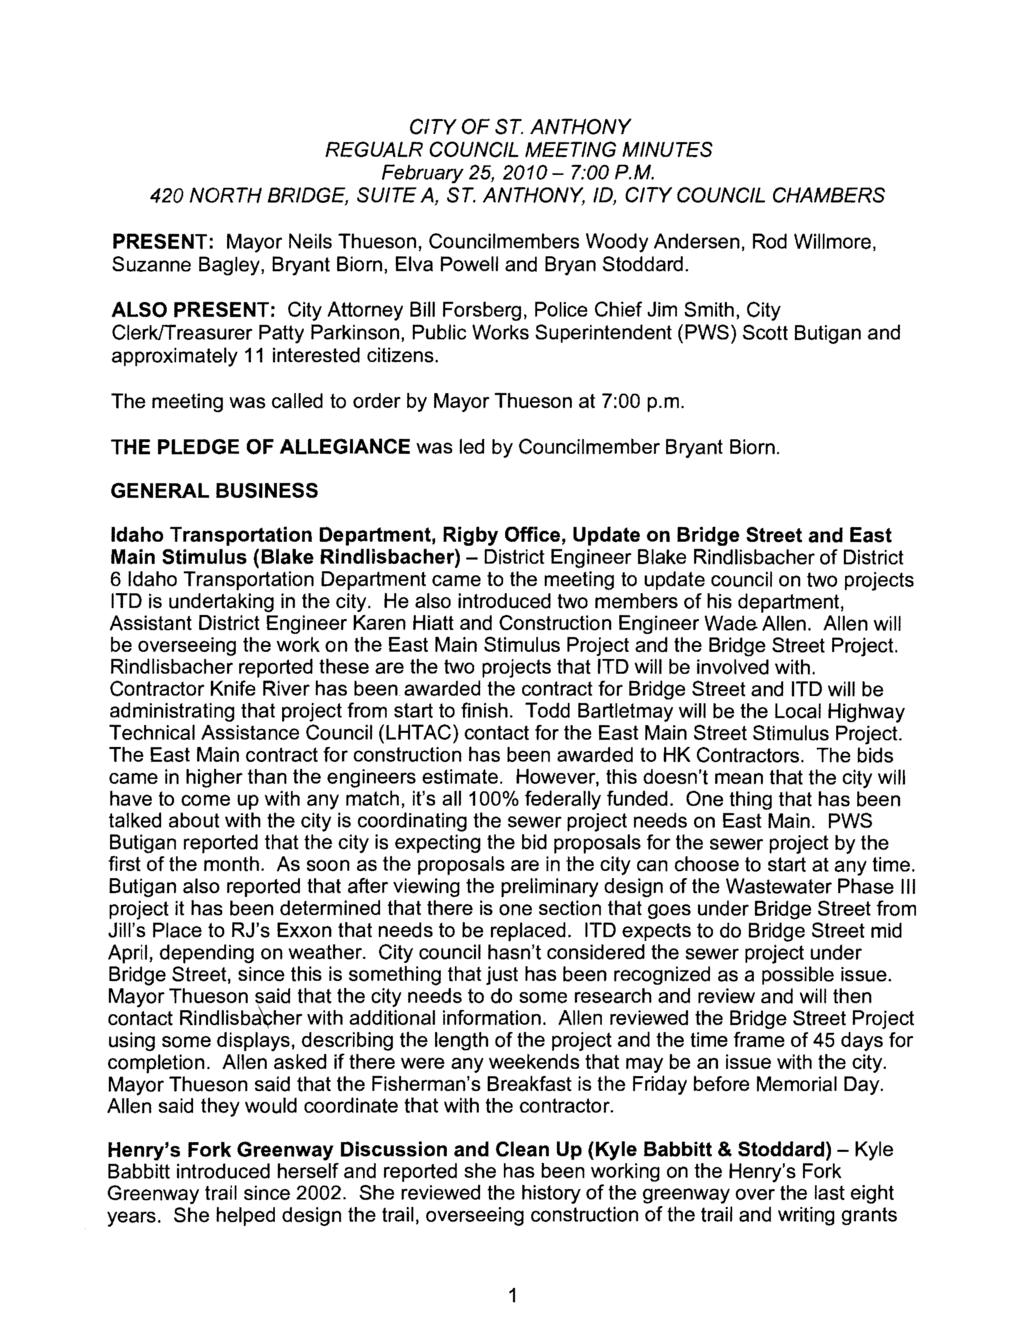 CITY OF ST. ANTHONY REGUALR COUNCIL MEETING MINUTES February 25, 2010-7:00 P.M. 420 NORTH BRIDGE, SUITE A, ST.